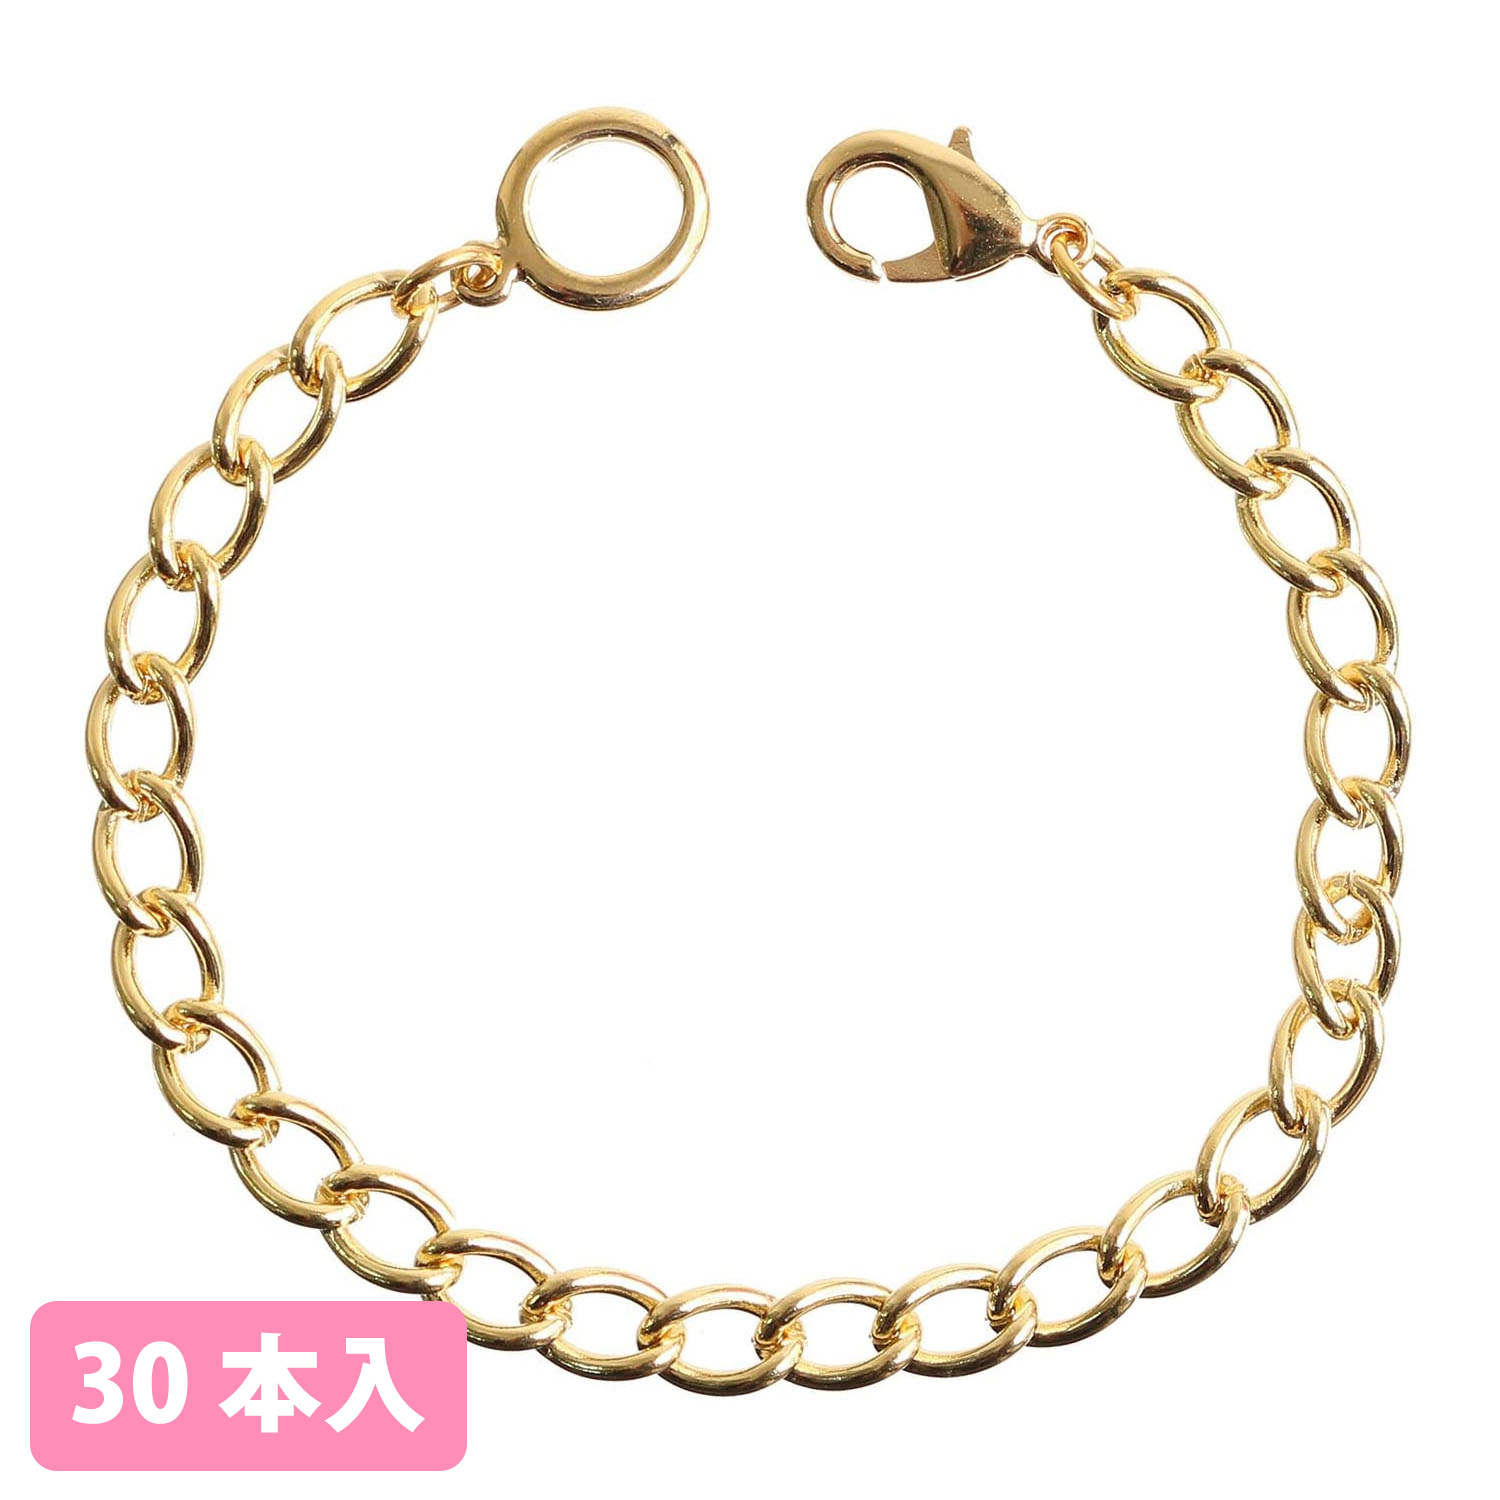 A8-65~69-30 Chains for Bag Charms Length 20cm 30pcs (pack)